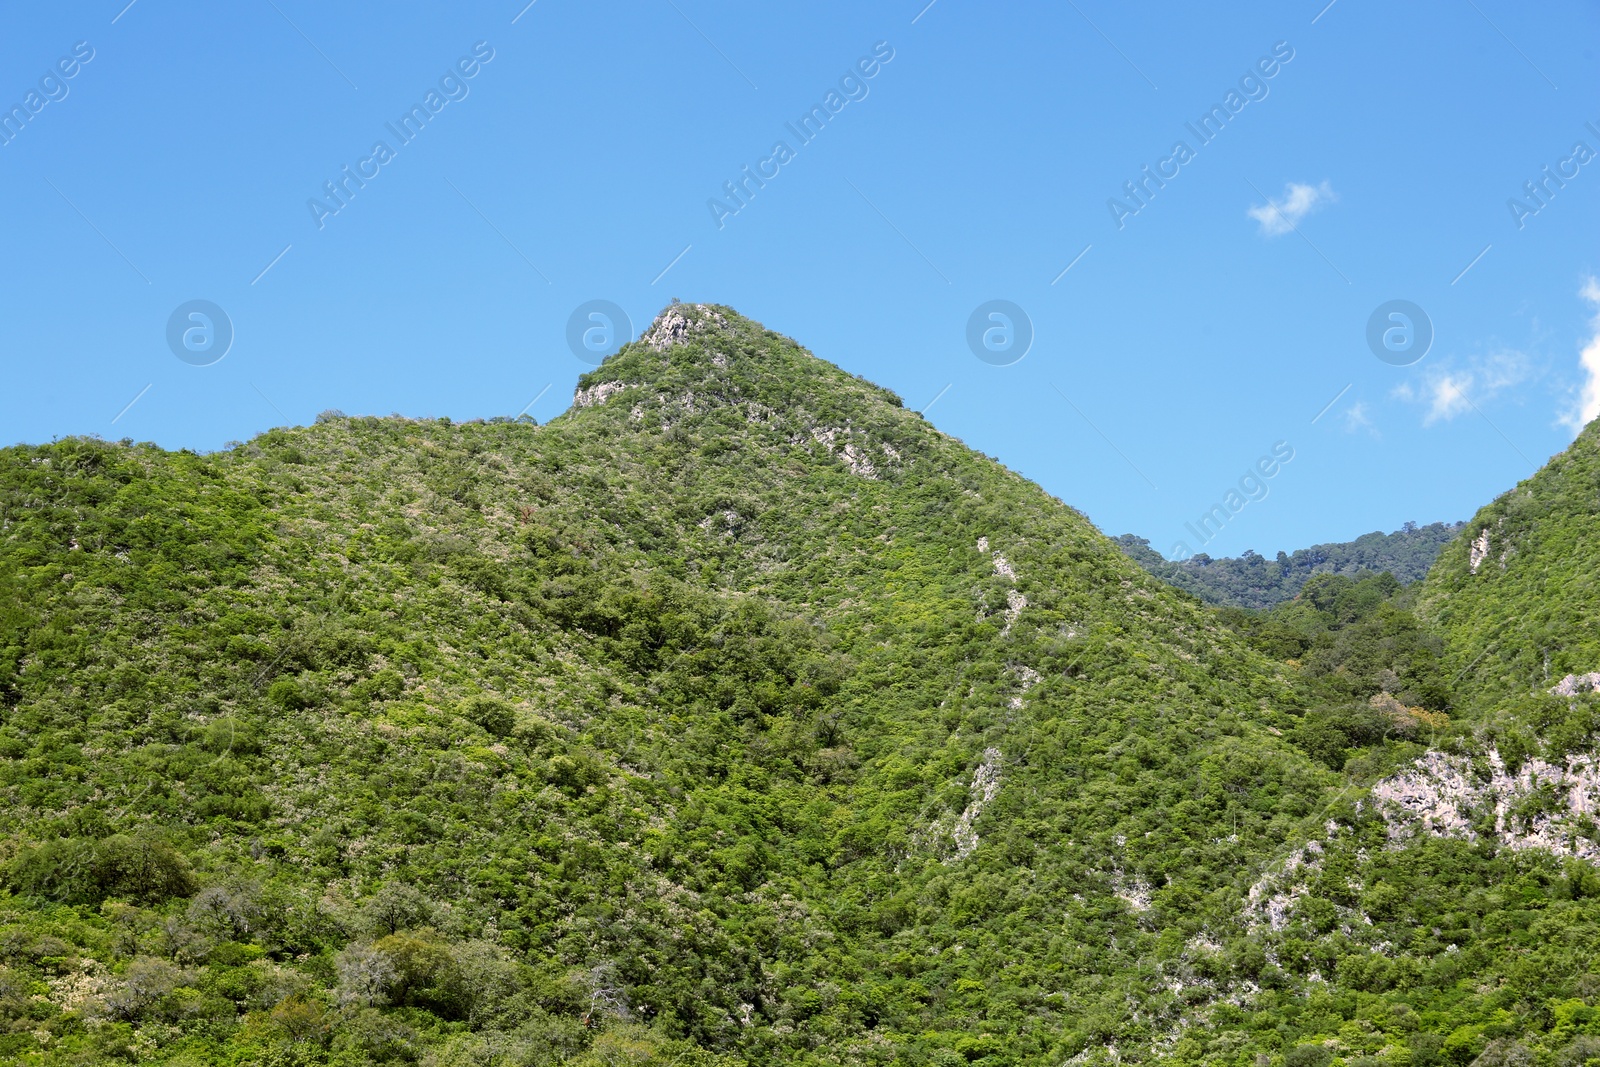 Photo of Picturesque view of beautiful mountains and blue sky